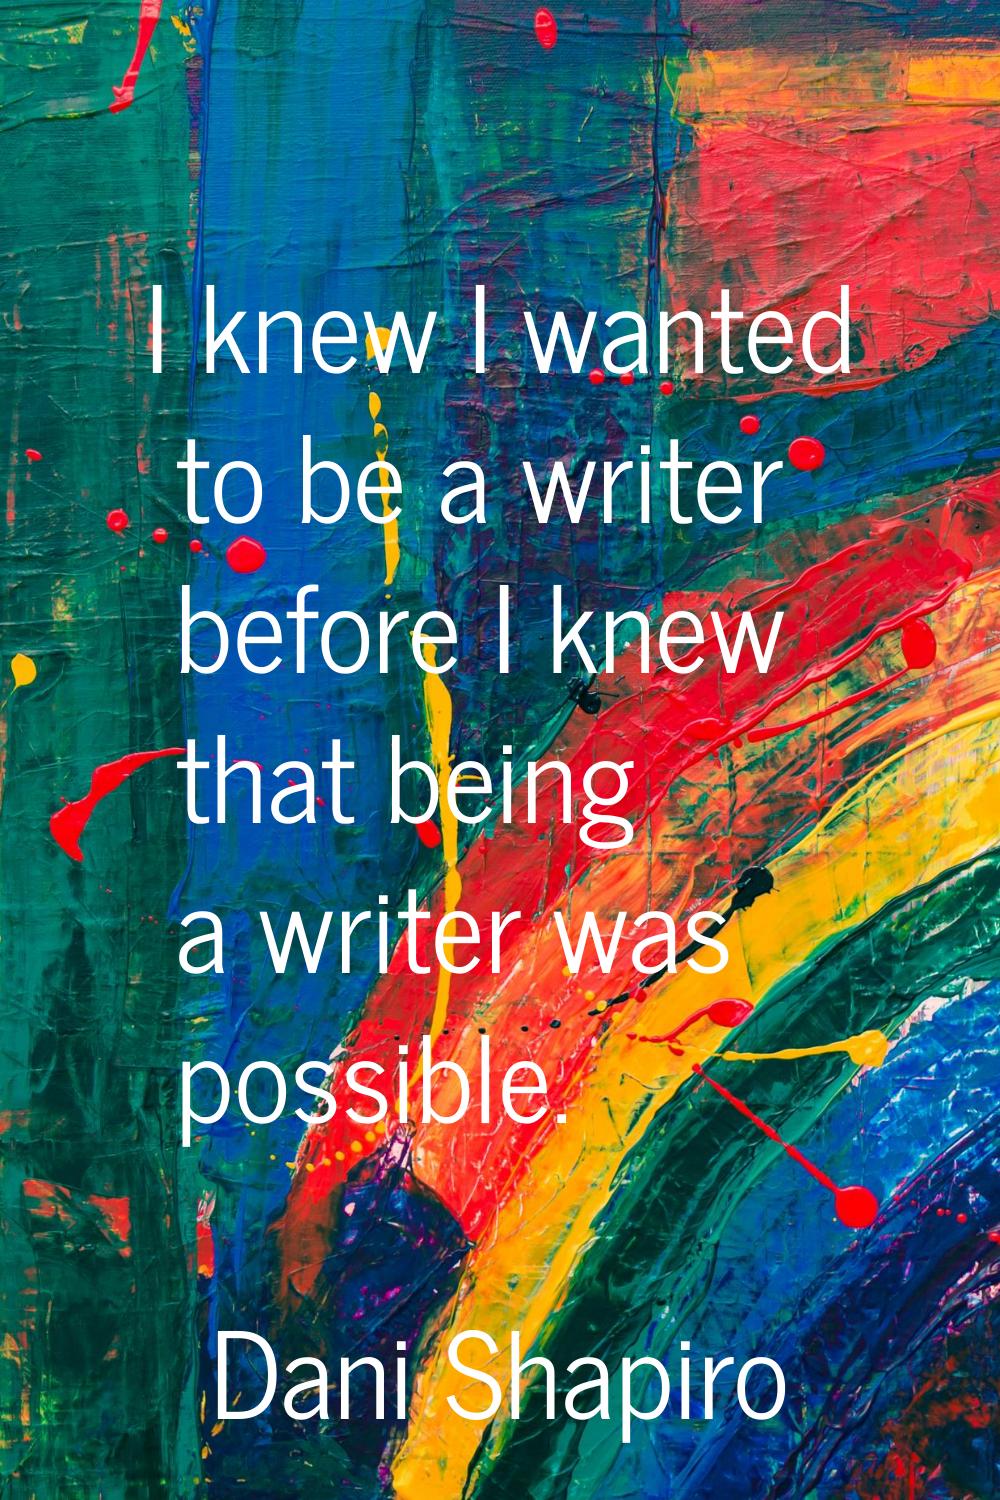 I knew I wanted to be a writer before I knew that being a writer was possible.